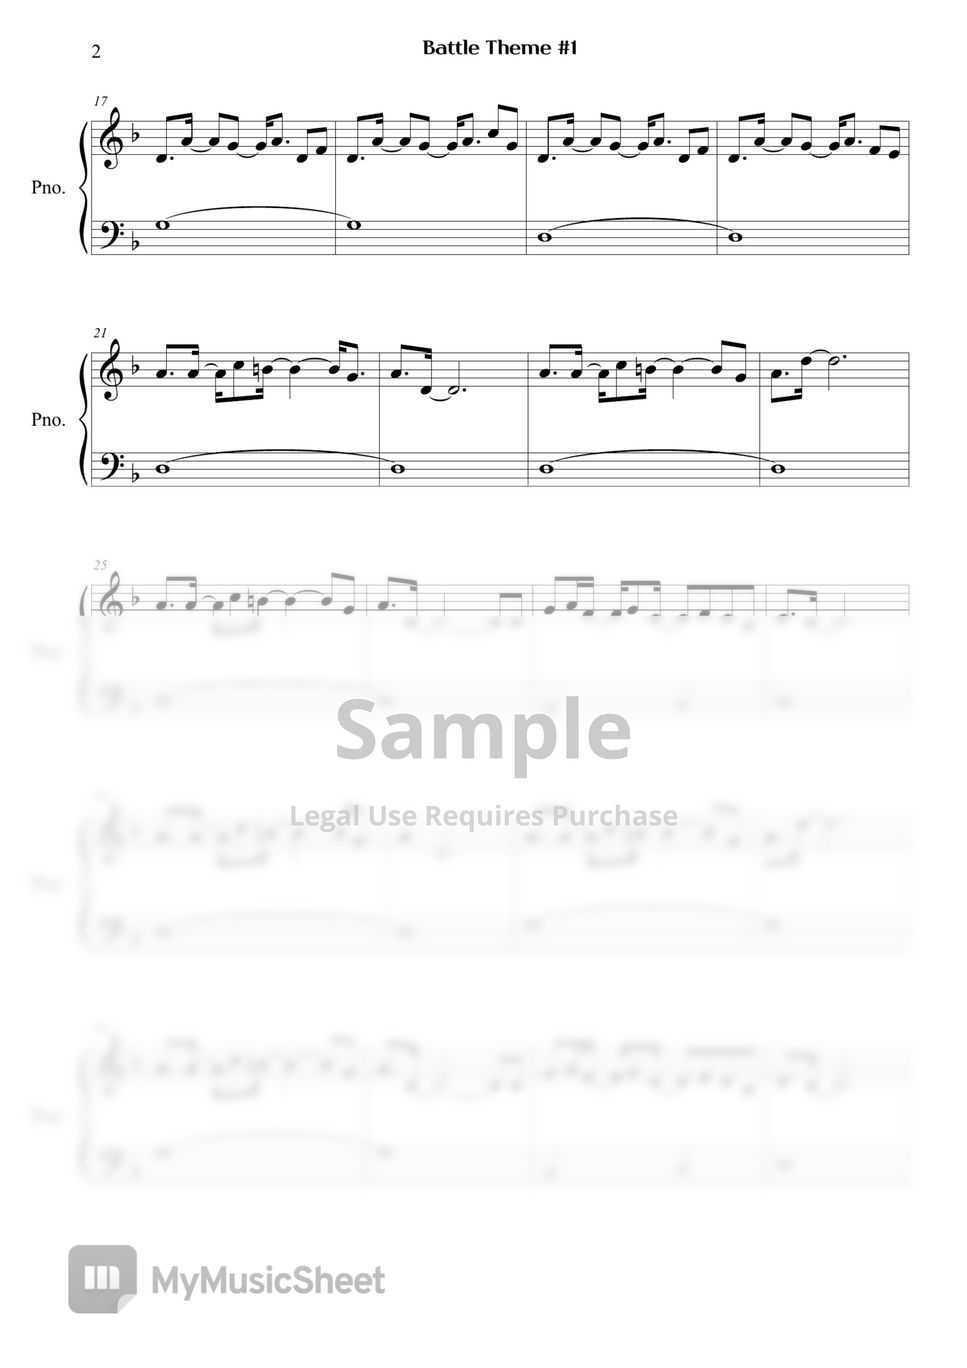 Yu-Gi-Oh! Master Duel - Battle Theme #1 Sheets by Right Now Piano